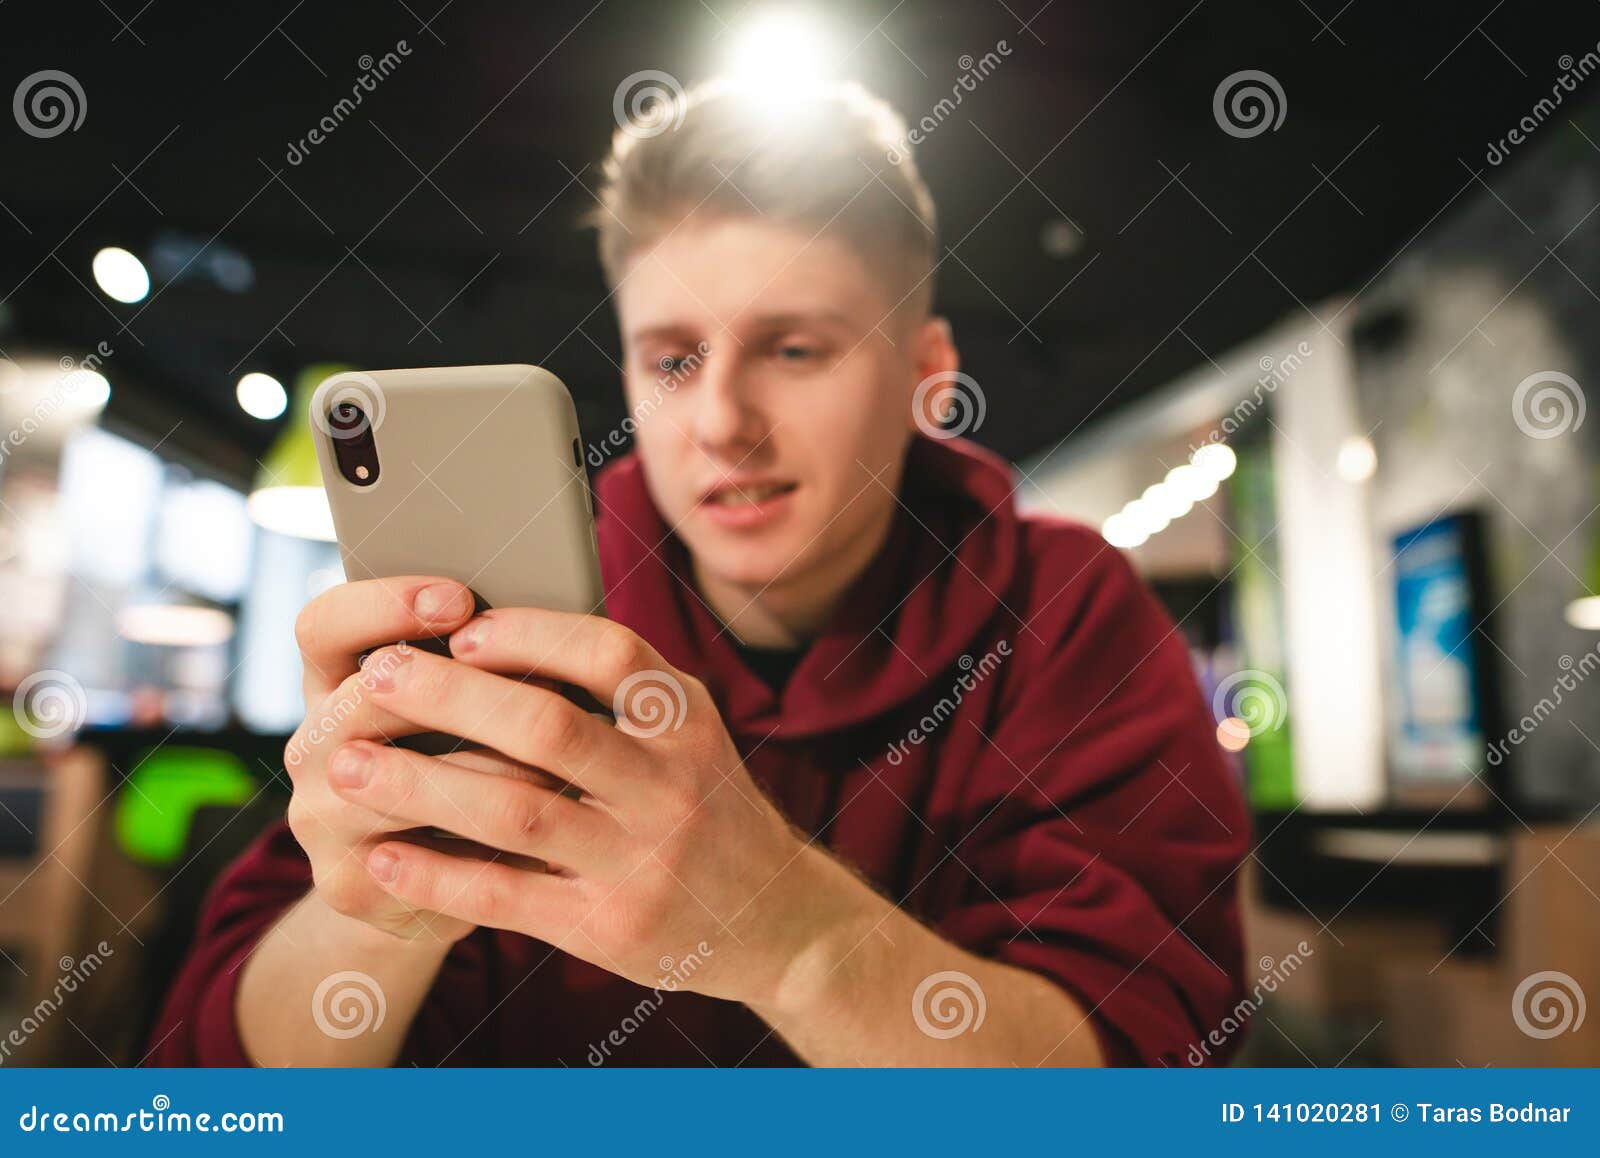 Focus on Smartphone, Positive Guy Uses the Internet on a Smartphone ...